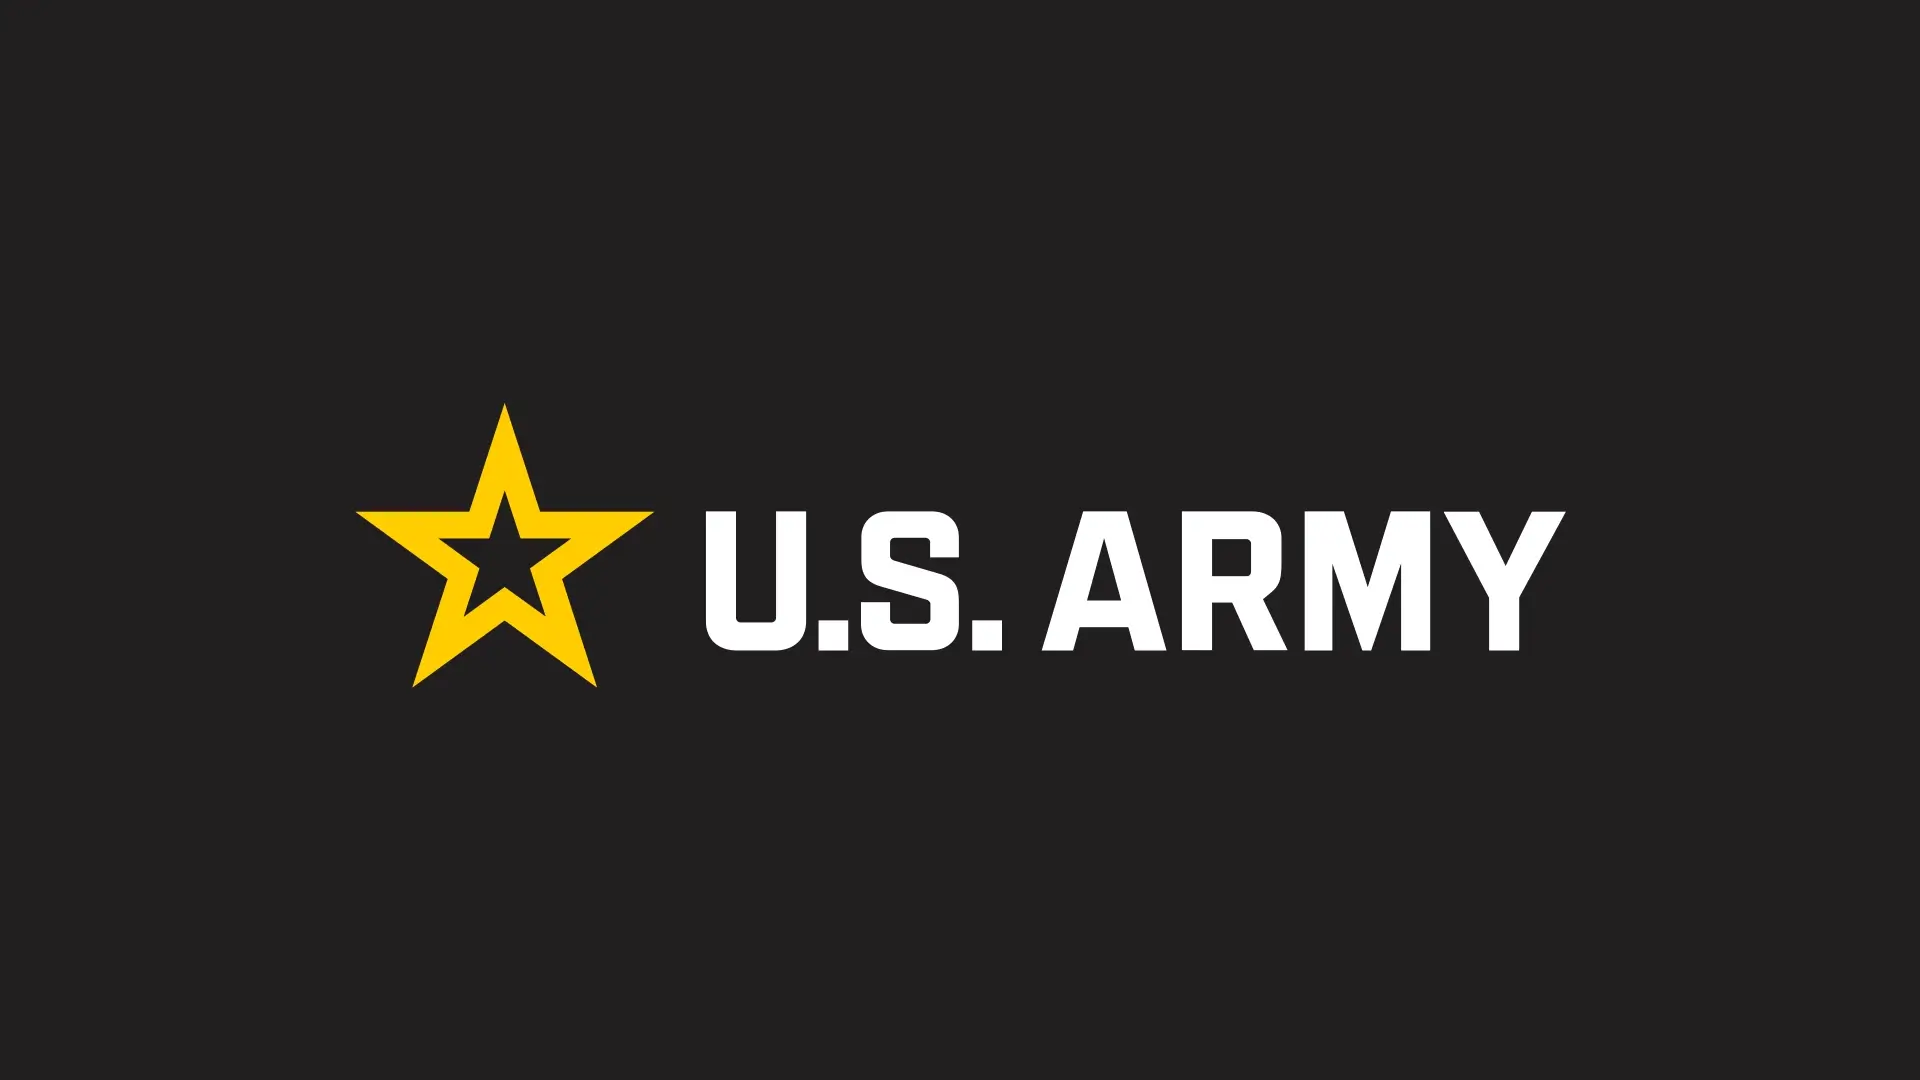 Our Responsibility to the US Army